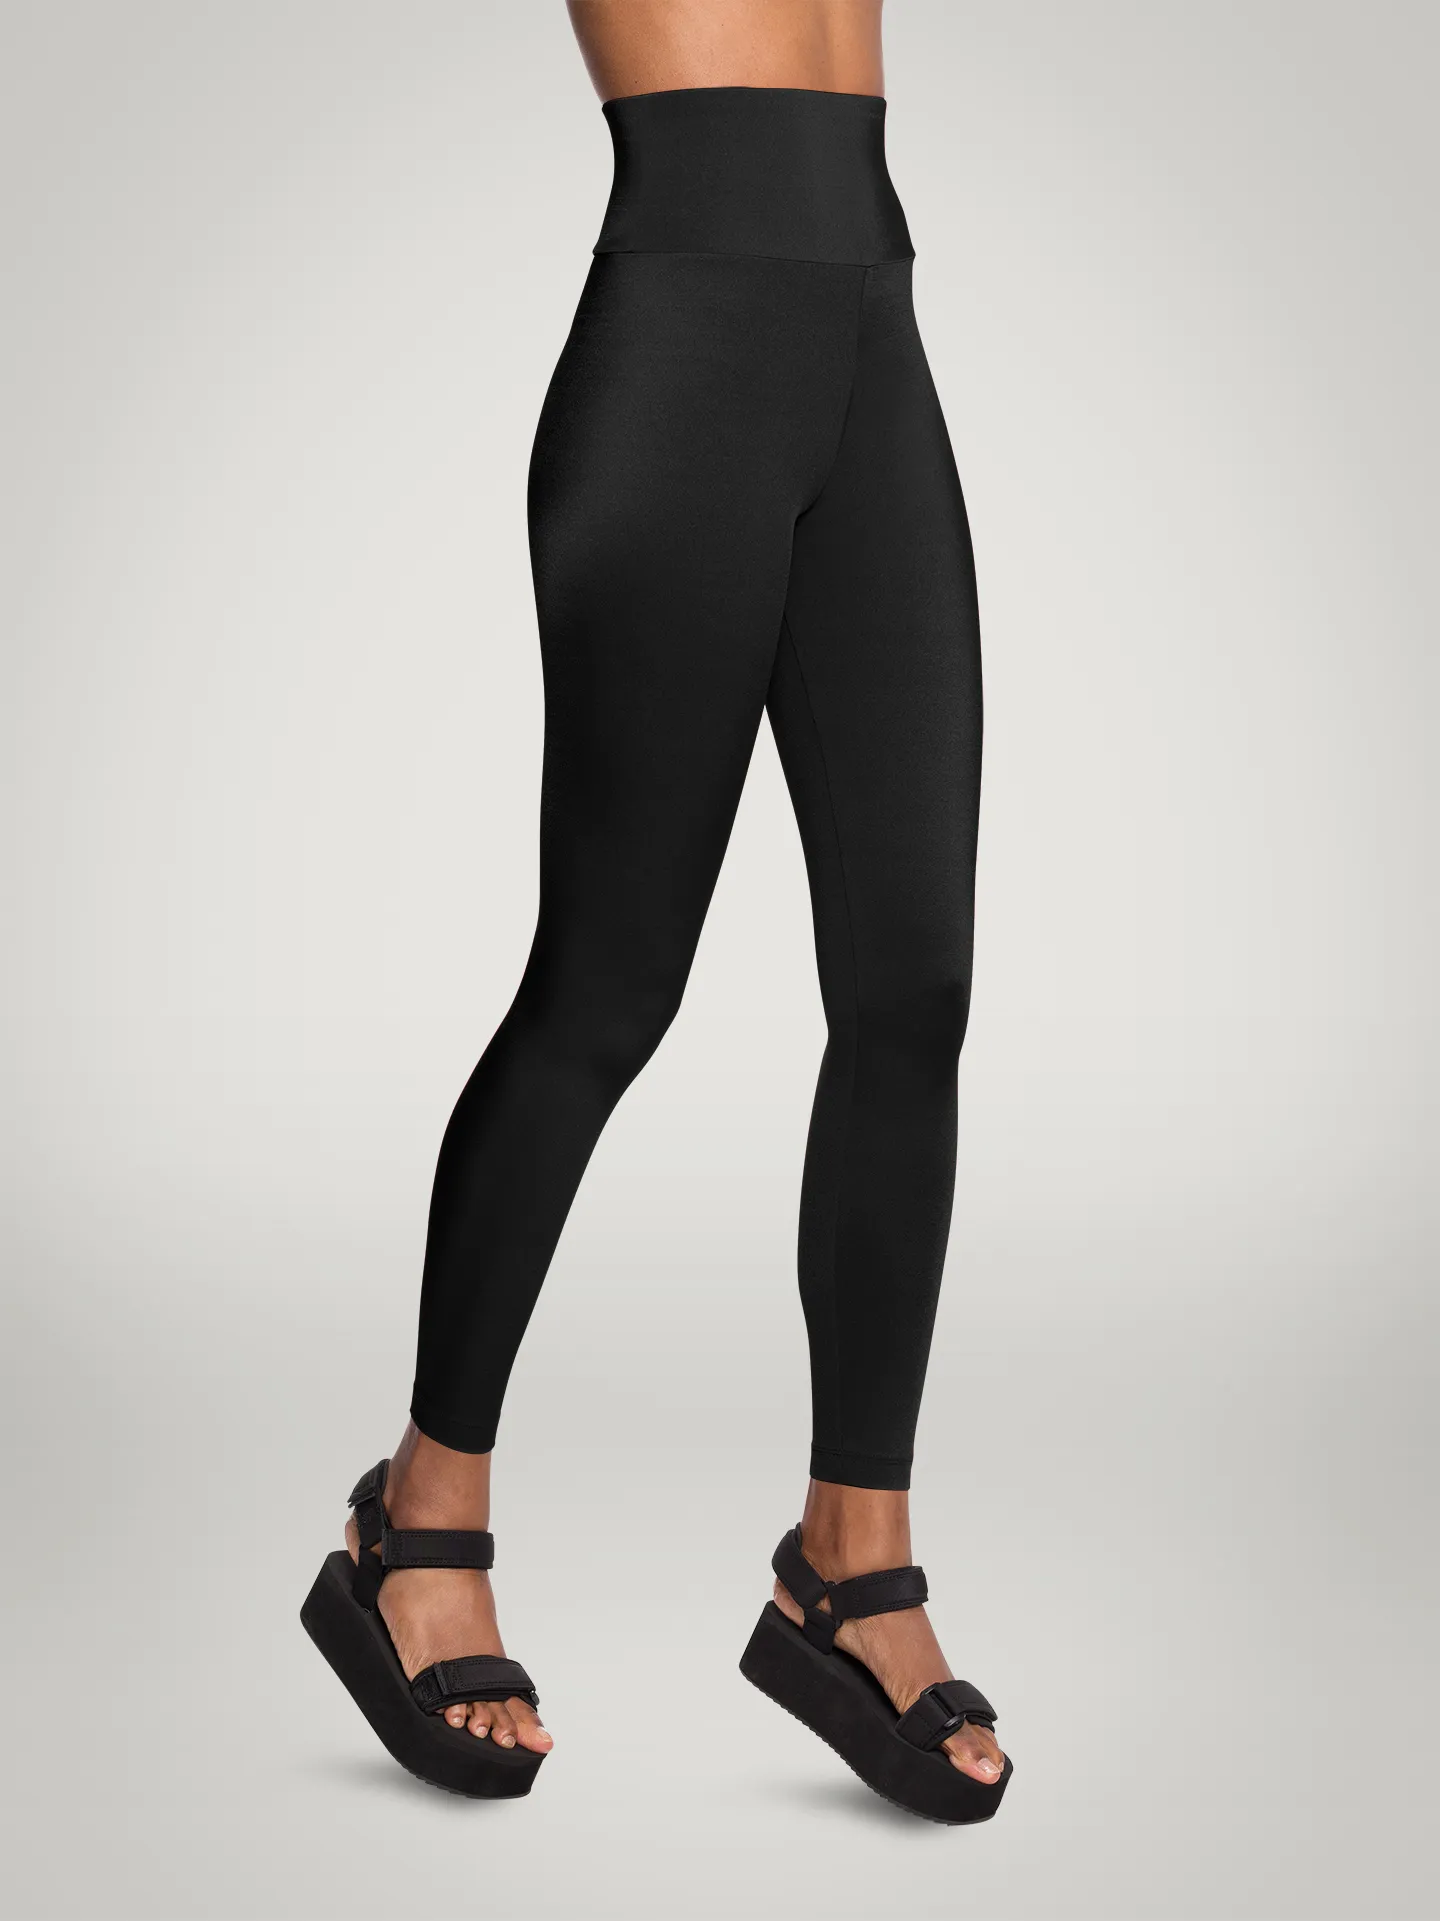 Wolford - The Workout Leggings, Donna, black, Taglia: L